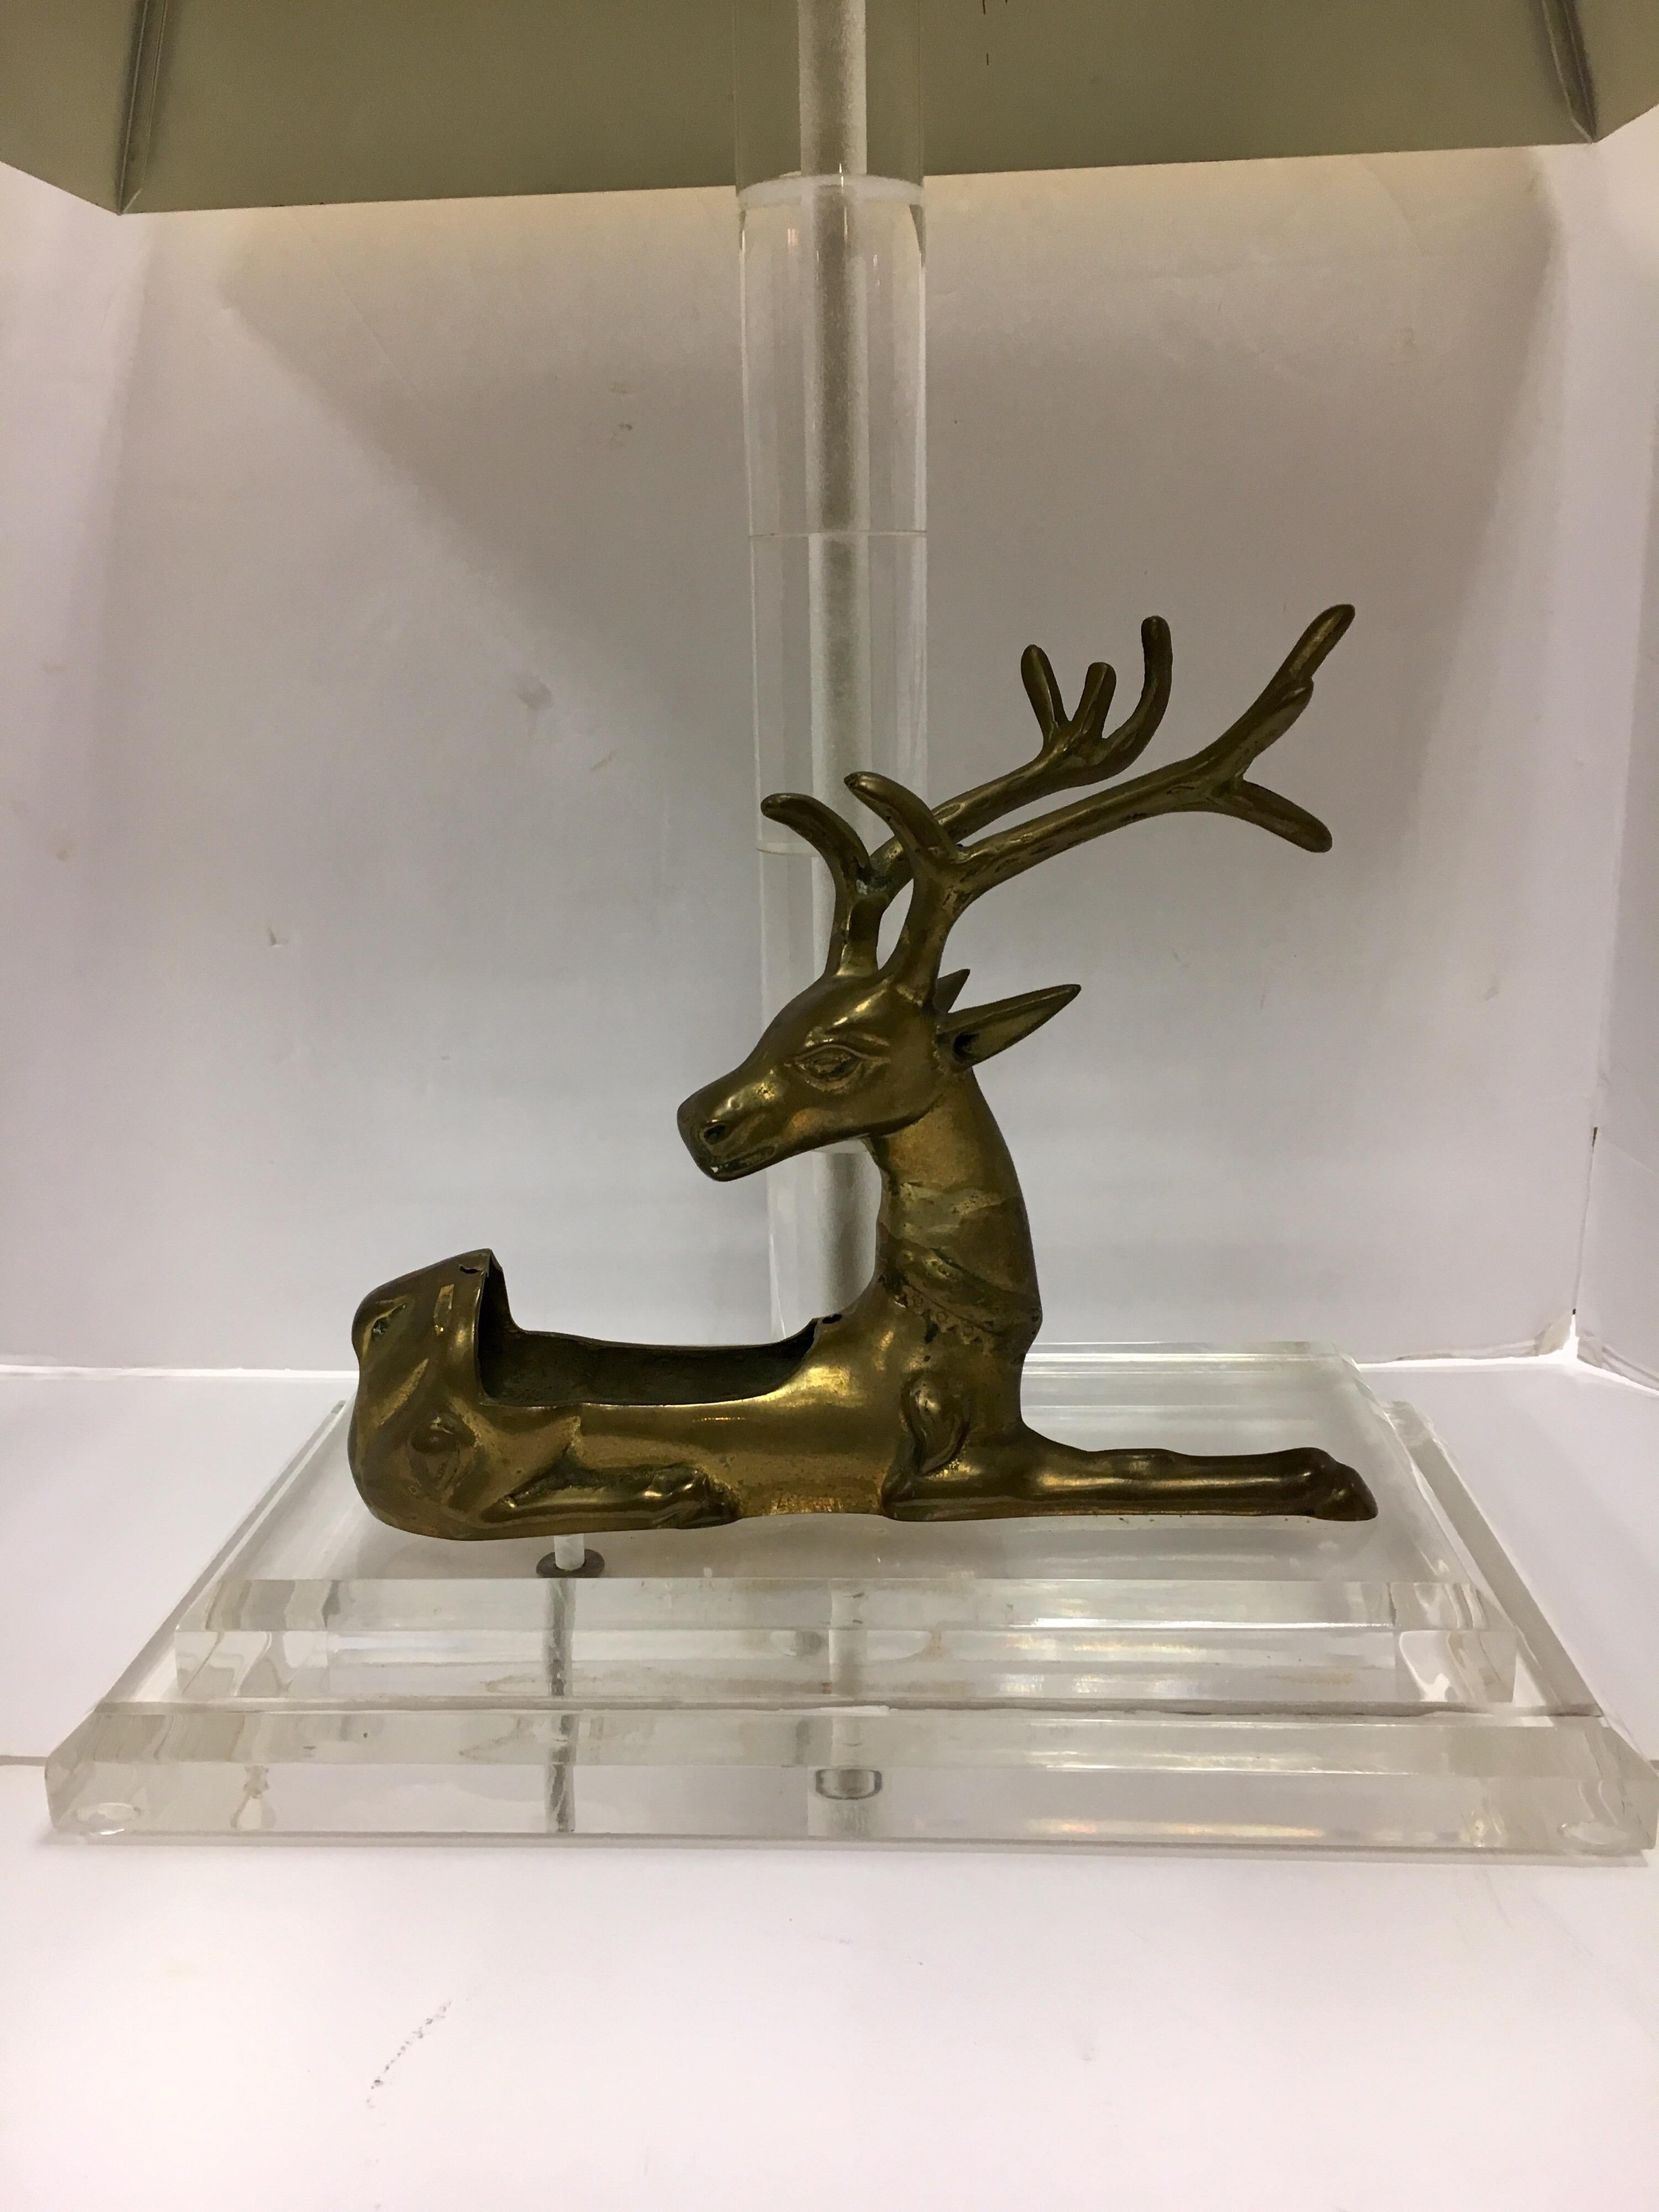 Late 20th Century Mid-Century Modern Lucite and Brass Table Lamp with Reindeer Deer Cardholder